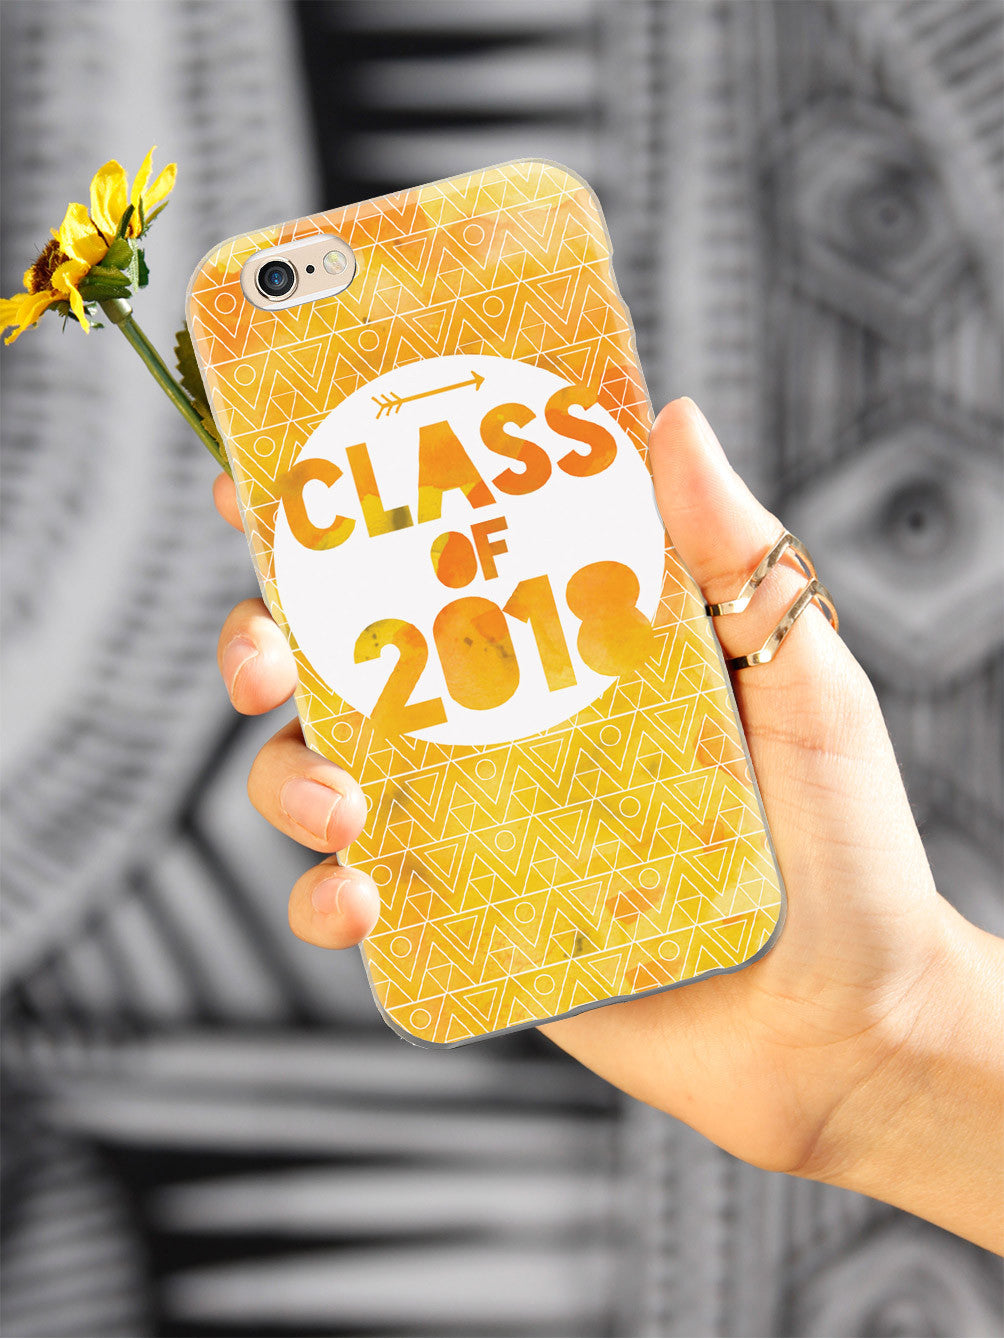 Class of 2018 - Yellow Watercolor Case